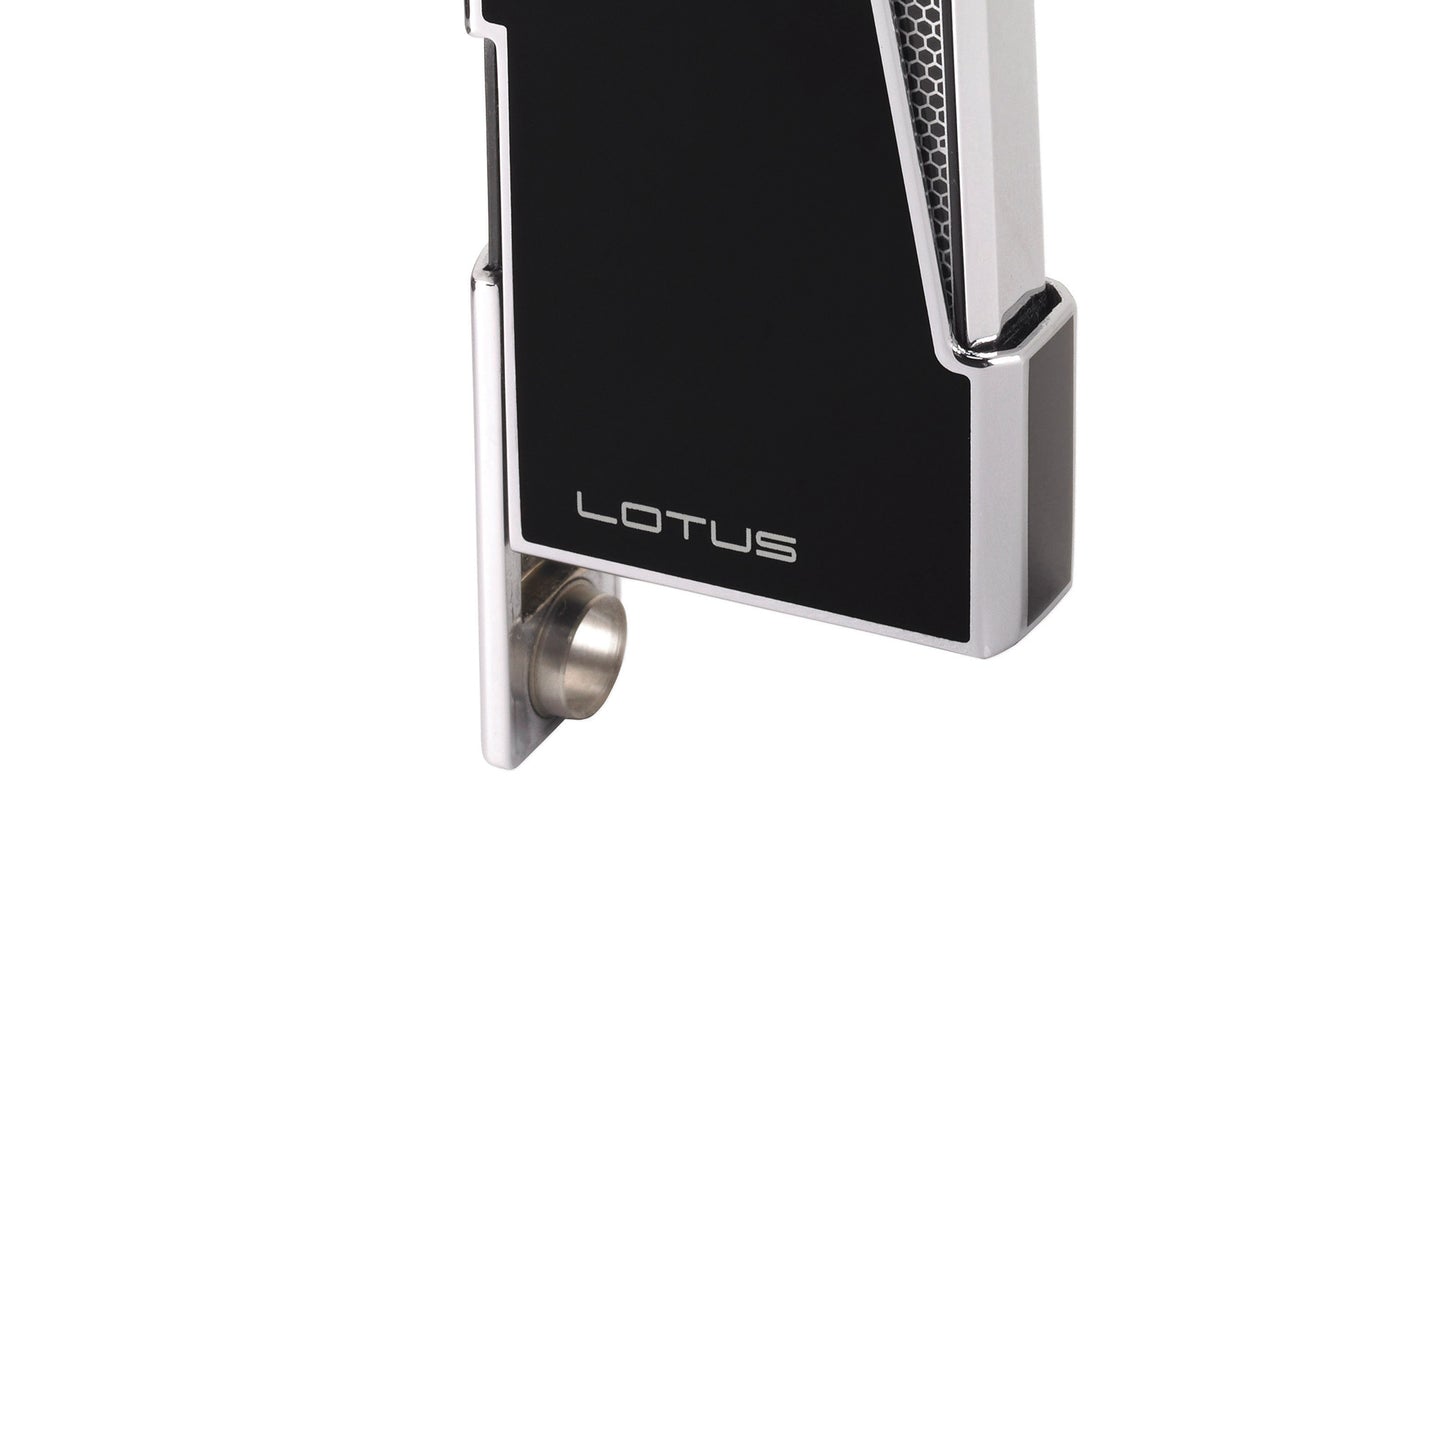 Apollo Dual Flame Jet Lighter by LOTUS